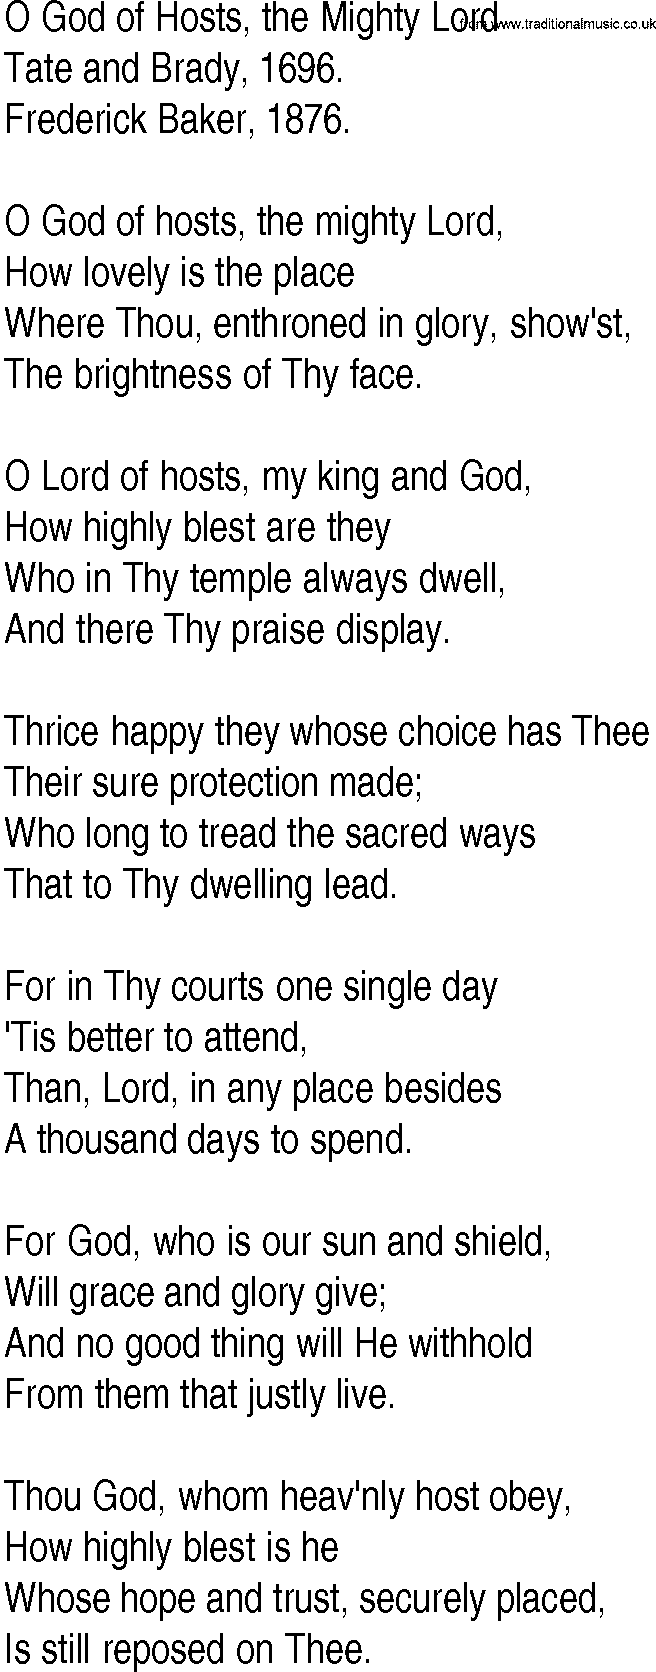 Hymn and Gospel Song: O God of Hosts, the Mighty Lord by Tate and Brady lyrics